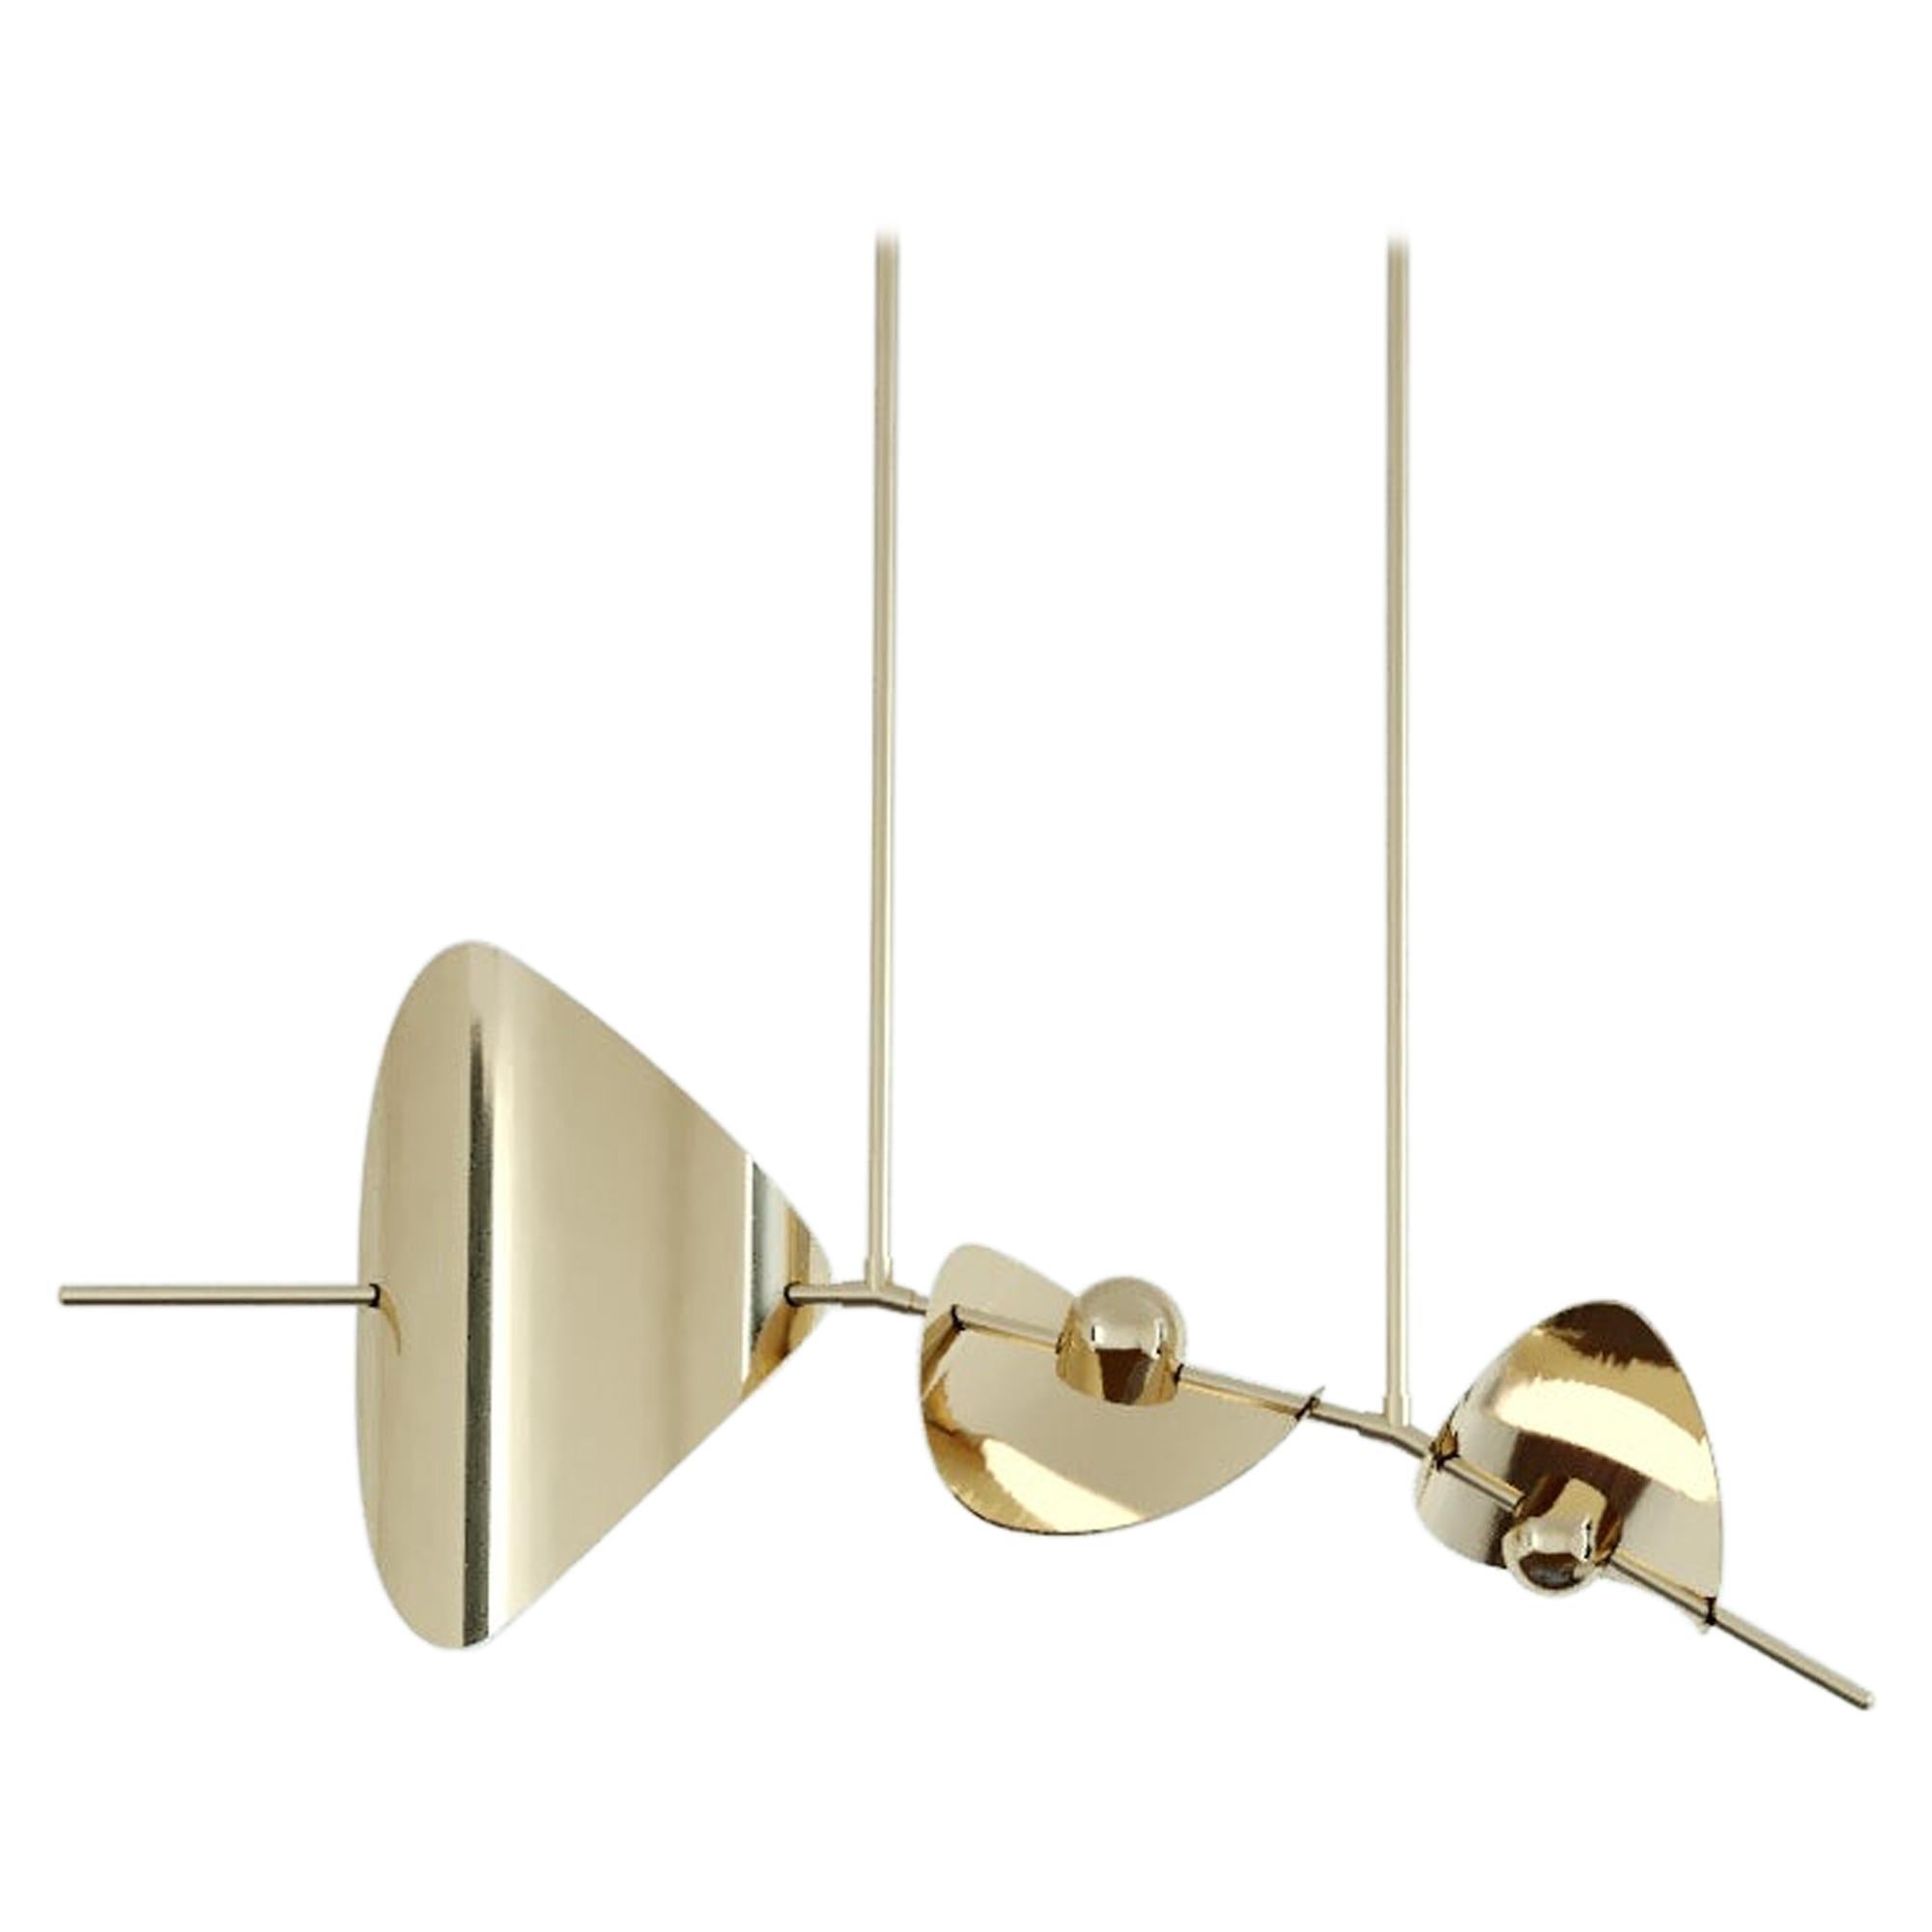 Bonnie Config 2 Contemporary LED Chandelier, Brass or Nickel, Small, Art For Sale